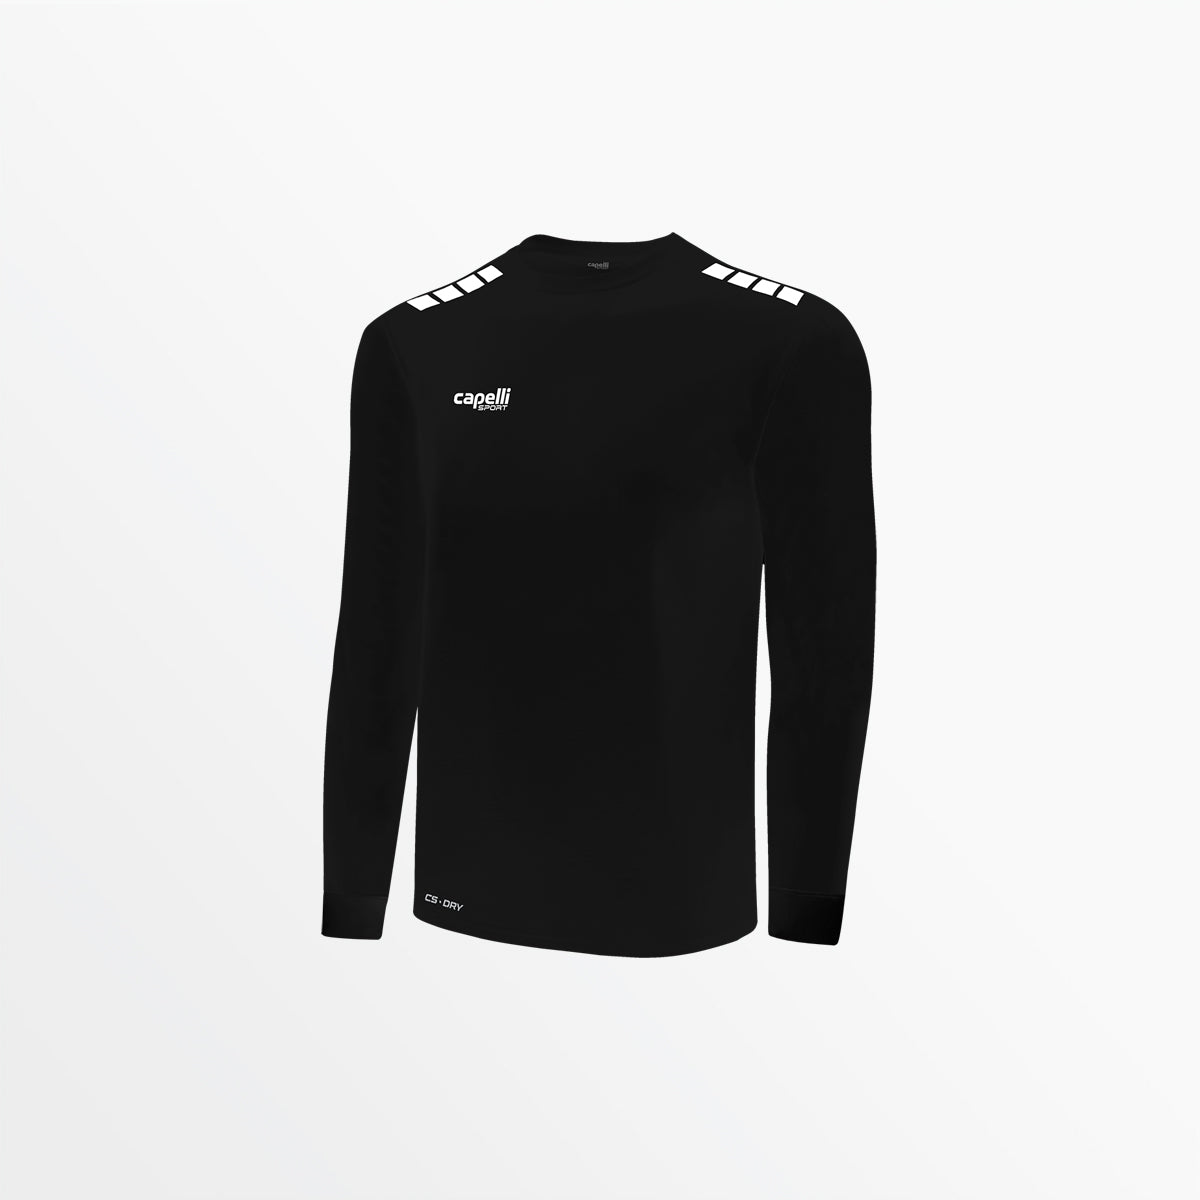 YOUTH TEAM LONG SLEEVE JERSEY